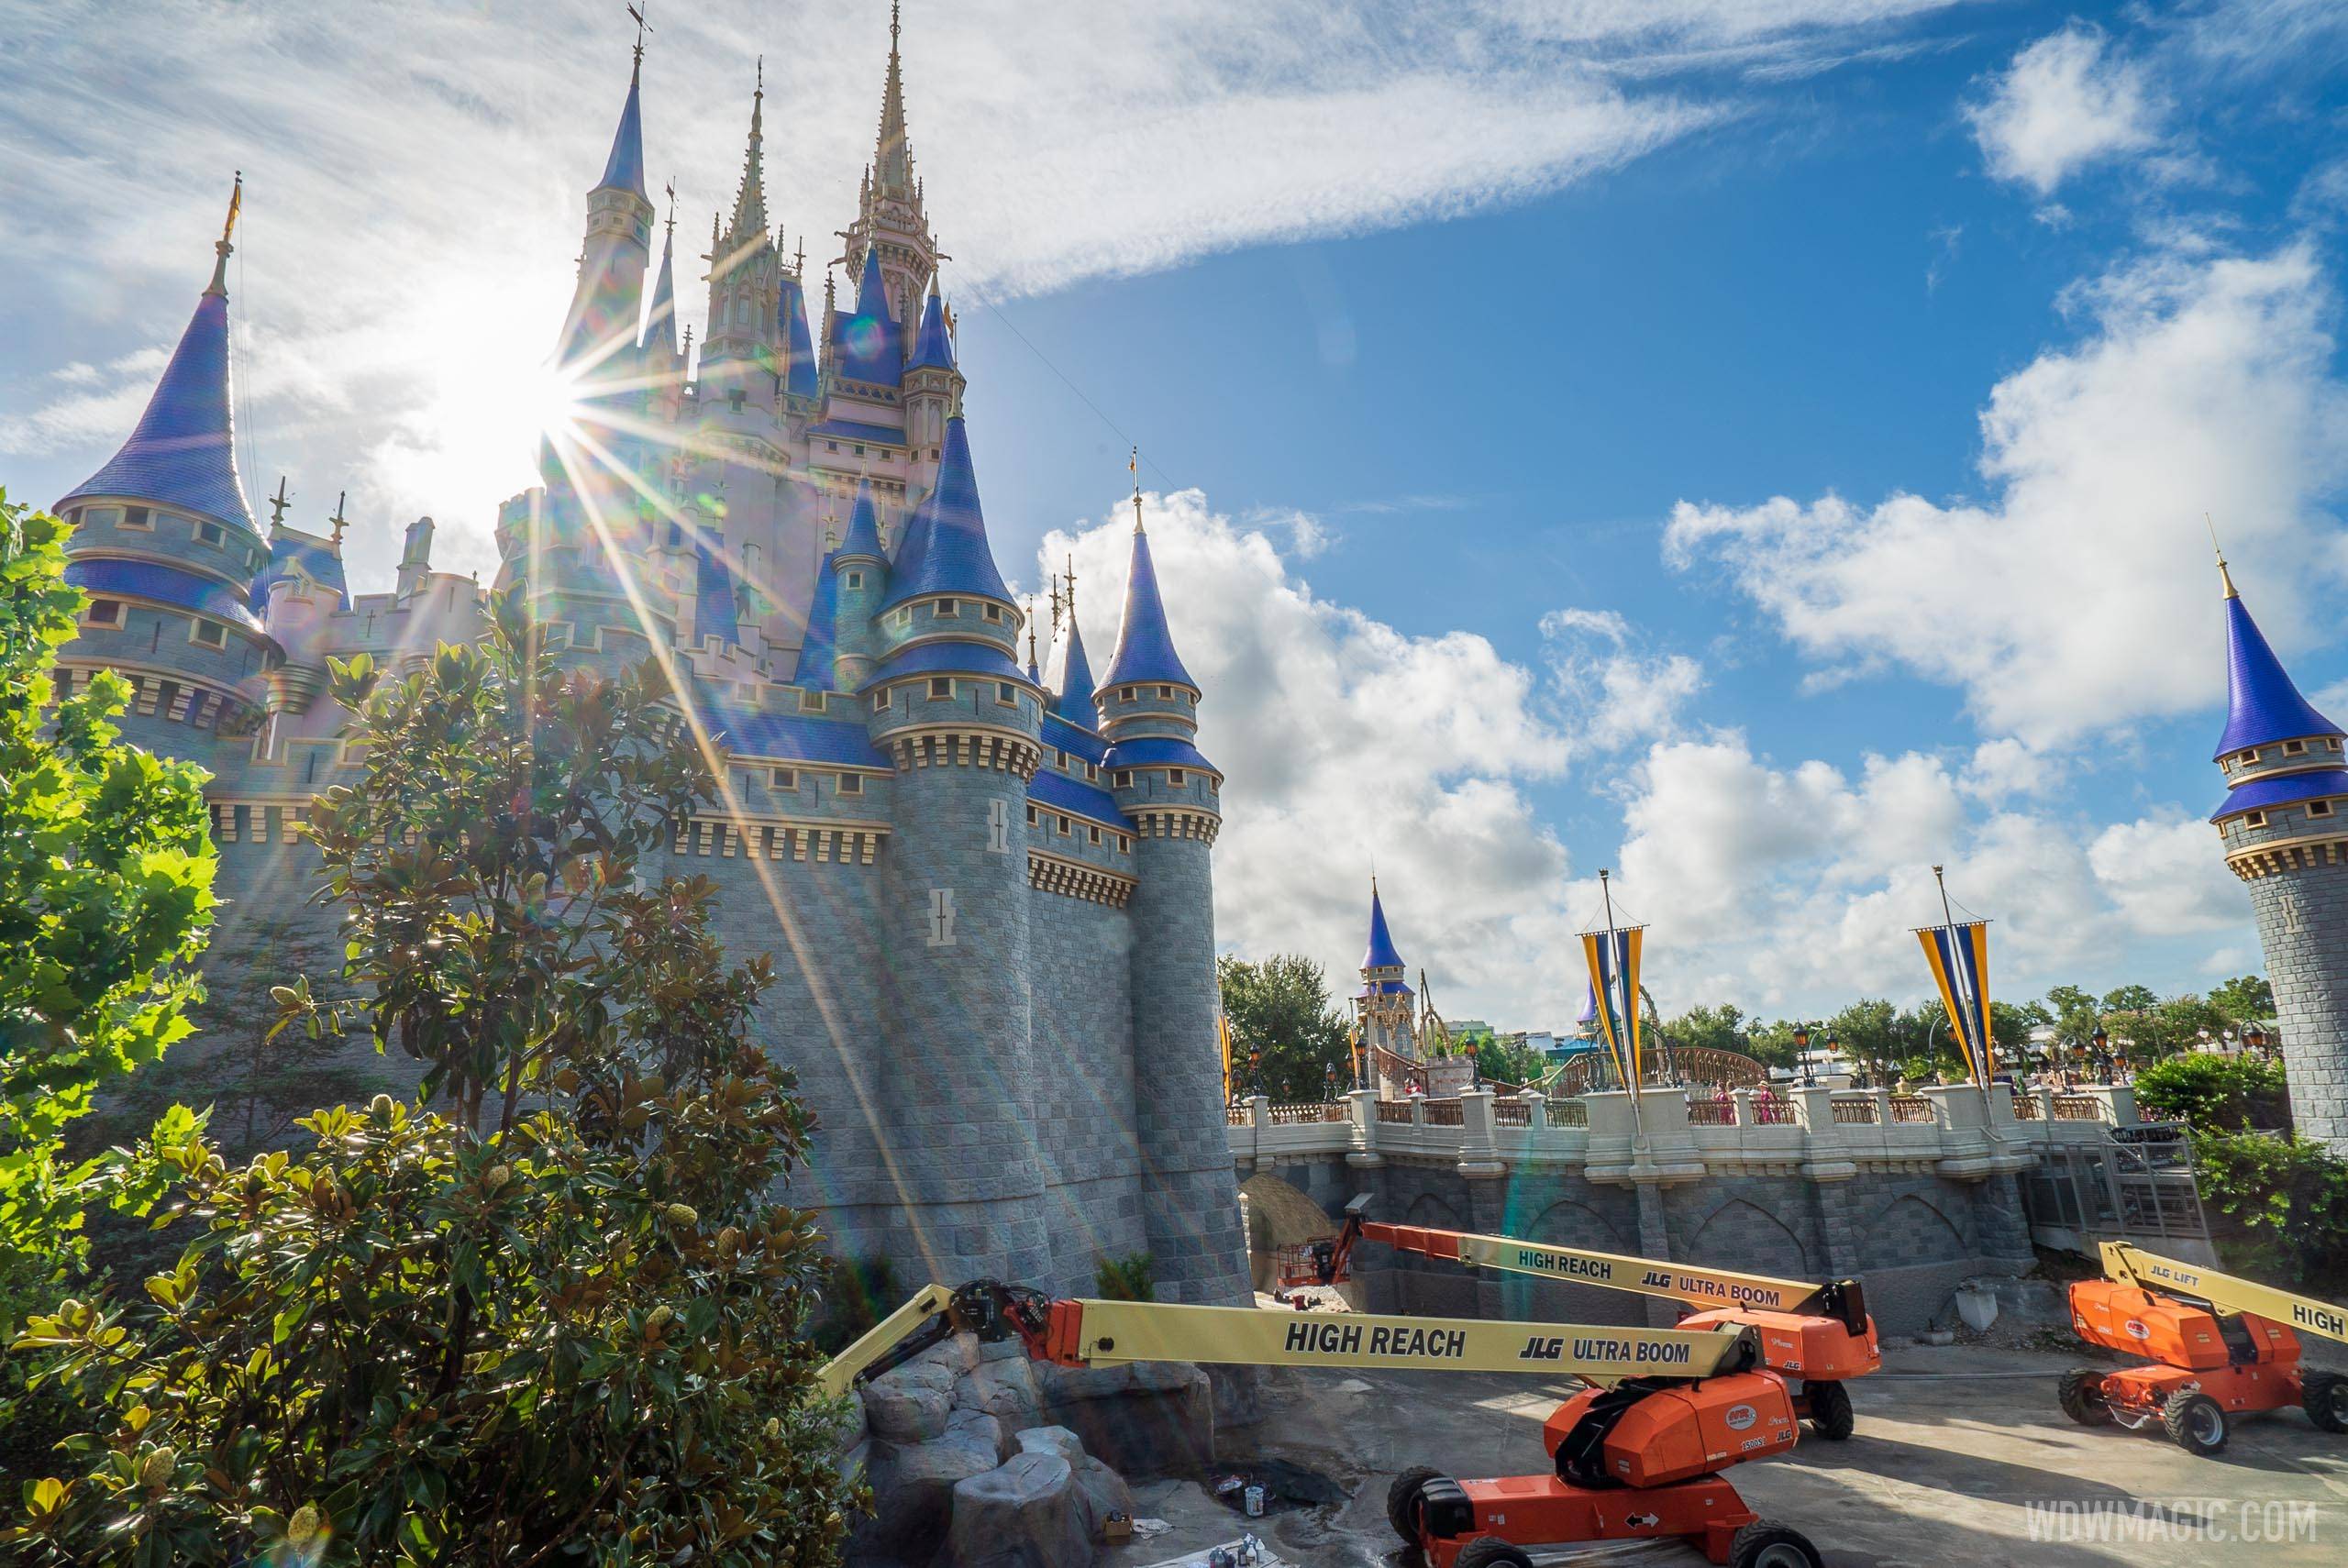 PHOTOS - Work continues on Cinderella Castle at the Magic Kingdom